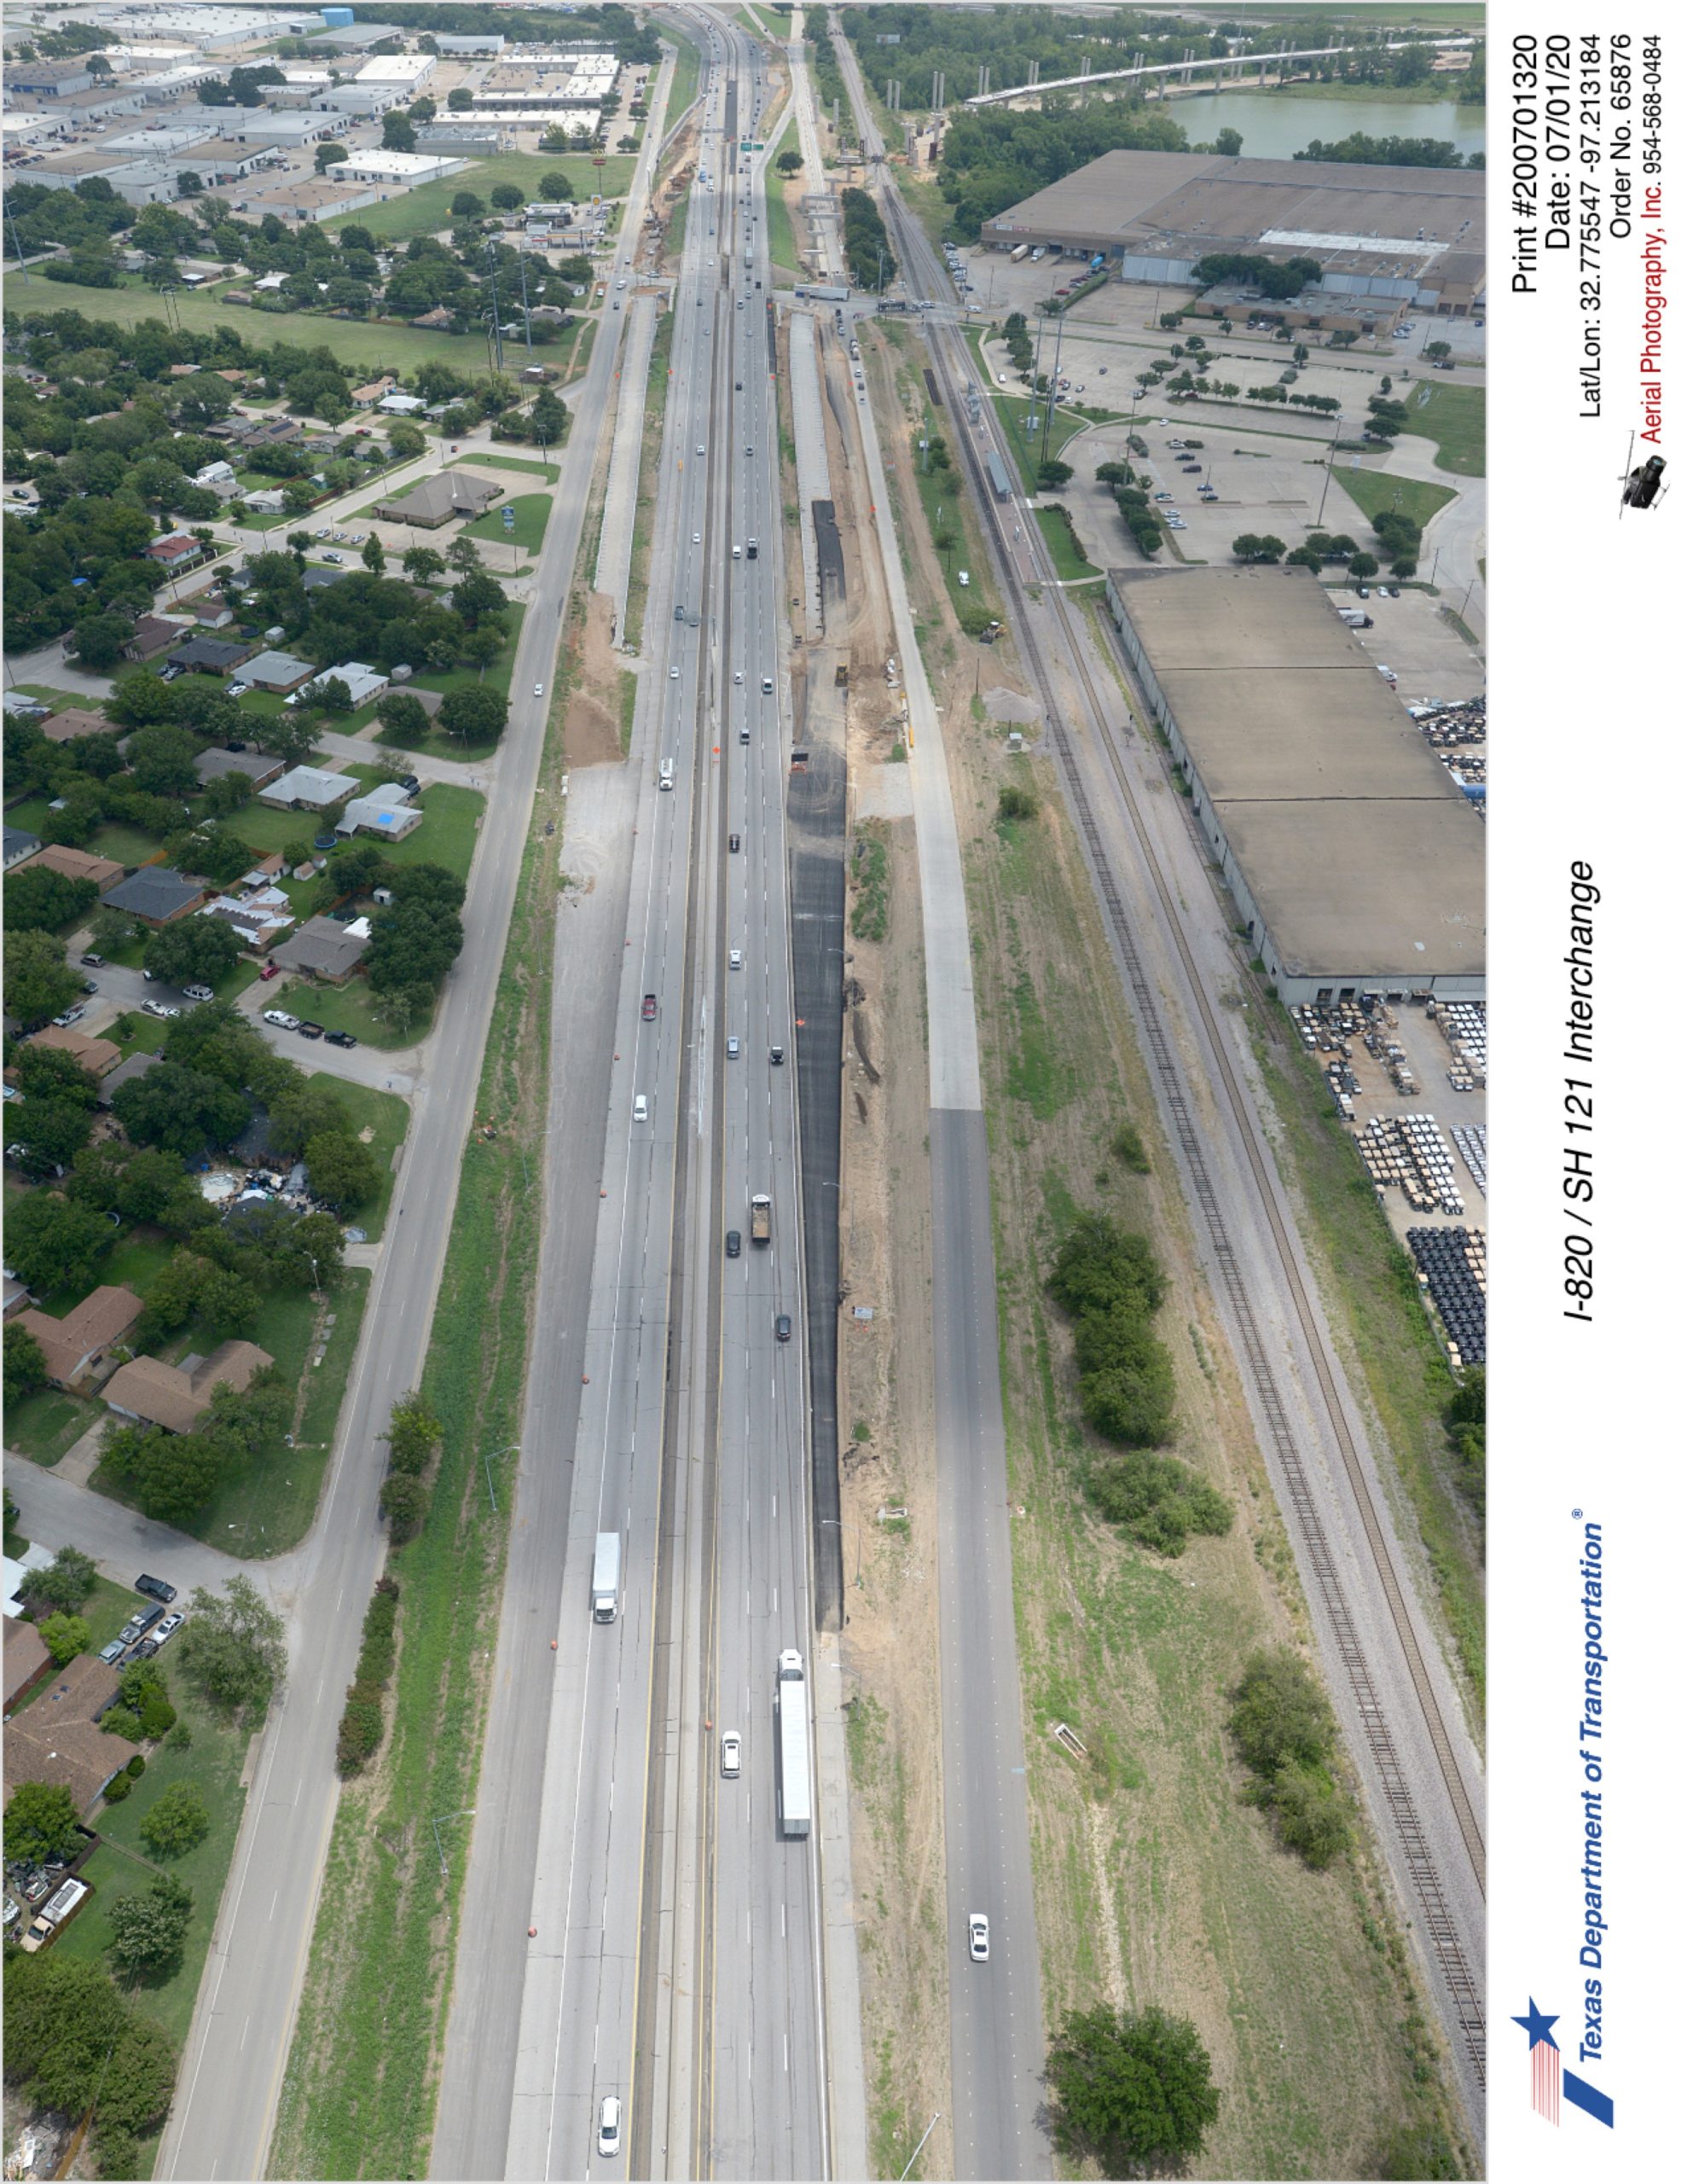 Looking northeast over SH 121 with Handley-Ederville Rd interchange in background. Construction of direct connector approaches and new northbound exit to Handley-Ederville Rd shown.